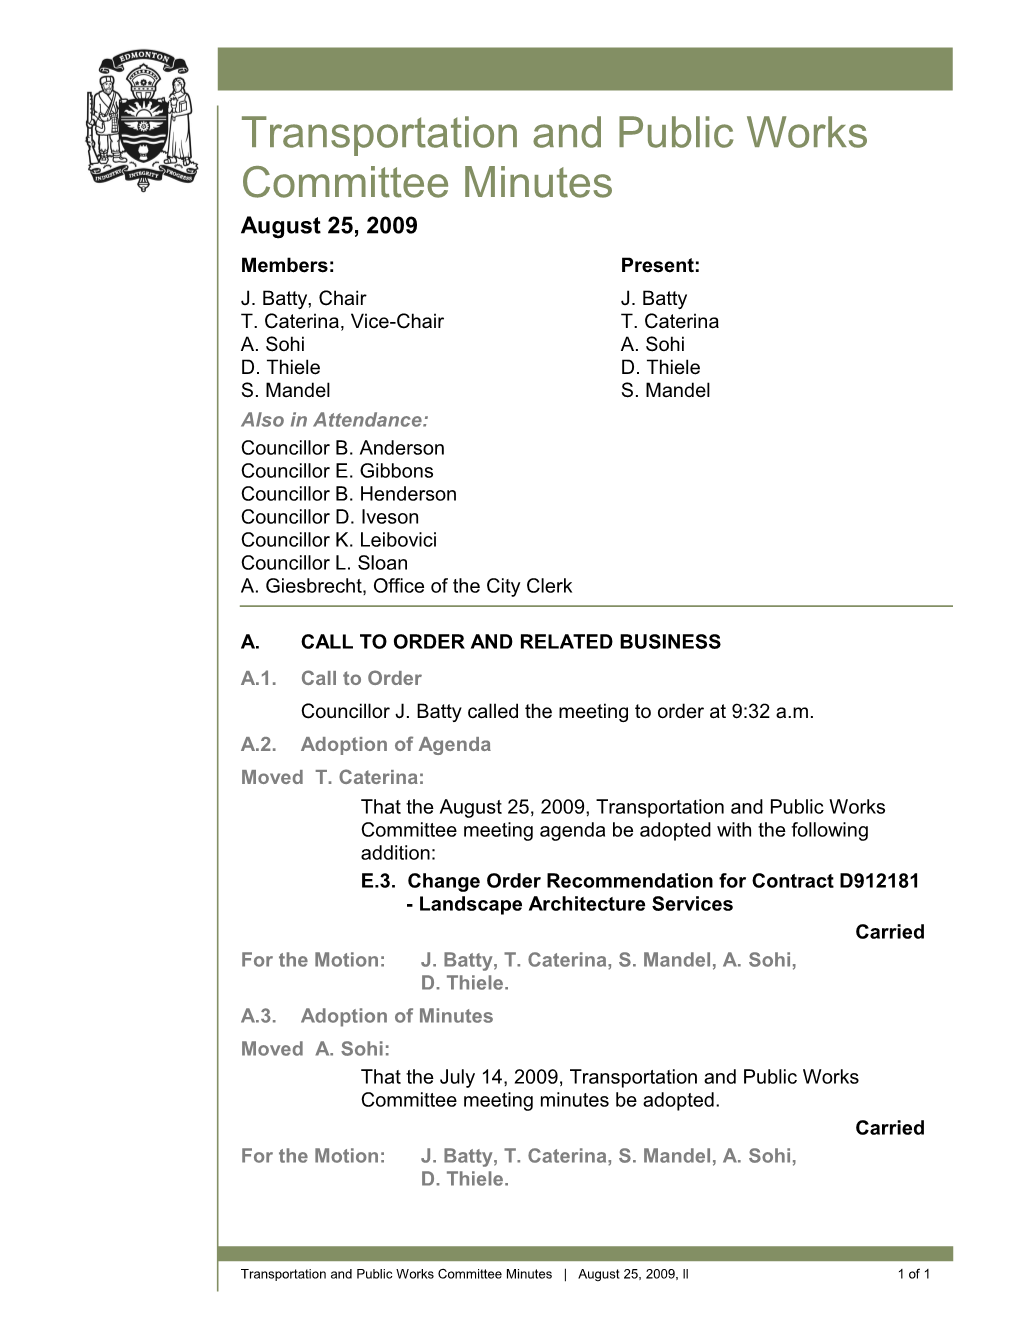 Minutes for Transportation and Public Works Committee August 25, 2009 Meeting